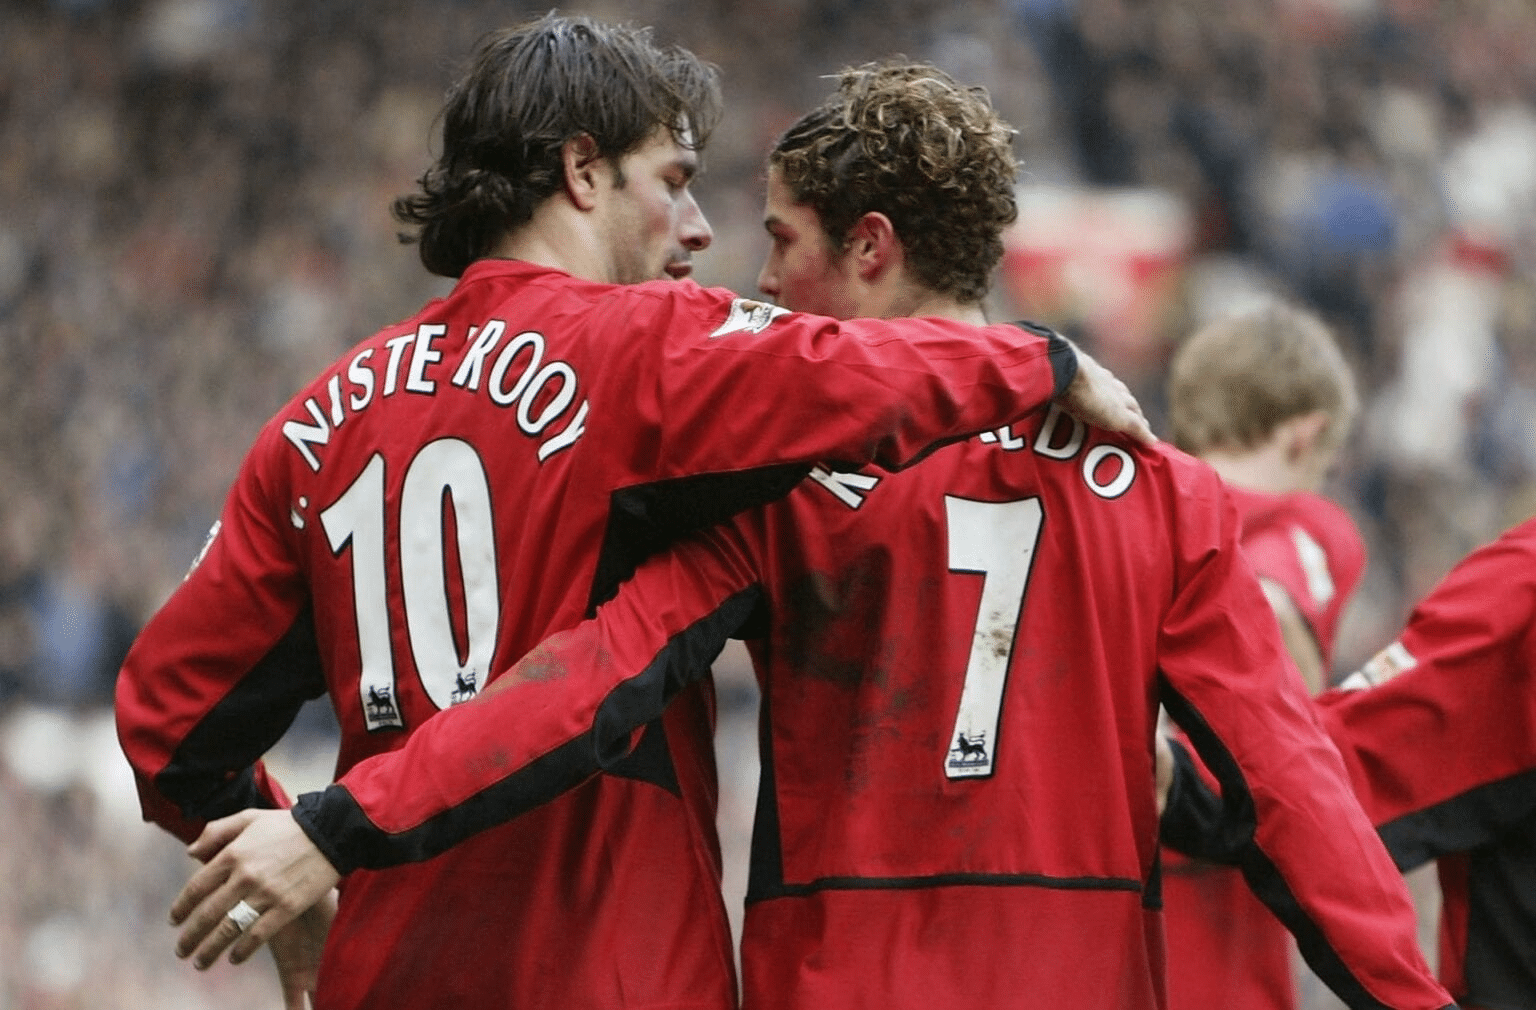 Van Nistelrooy Speaks Up On His Relationship With Cristiano Ronaldo At Man United